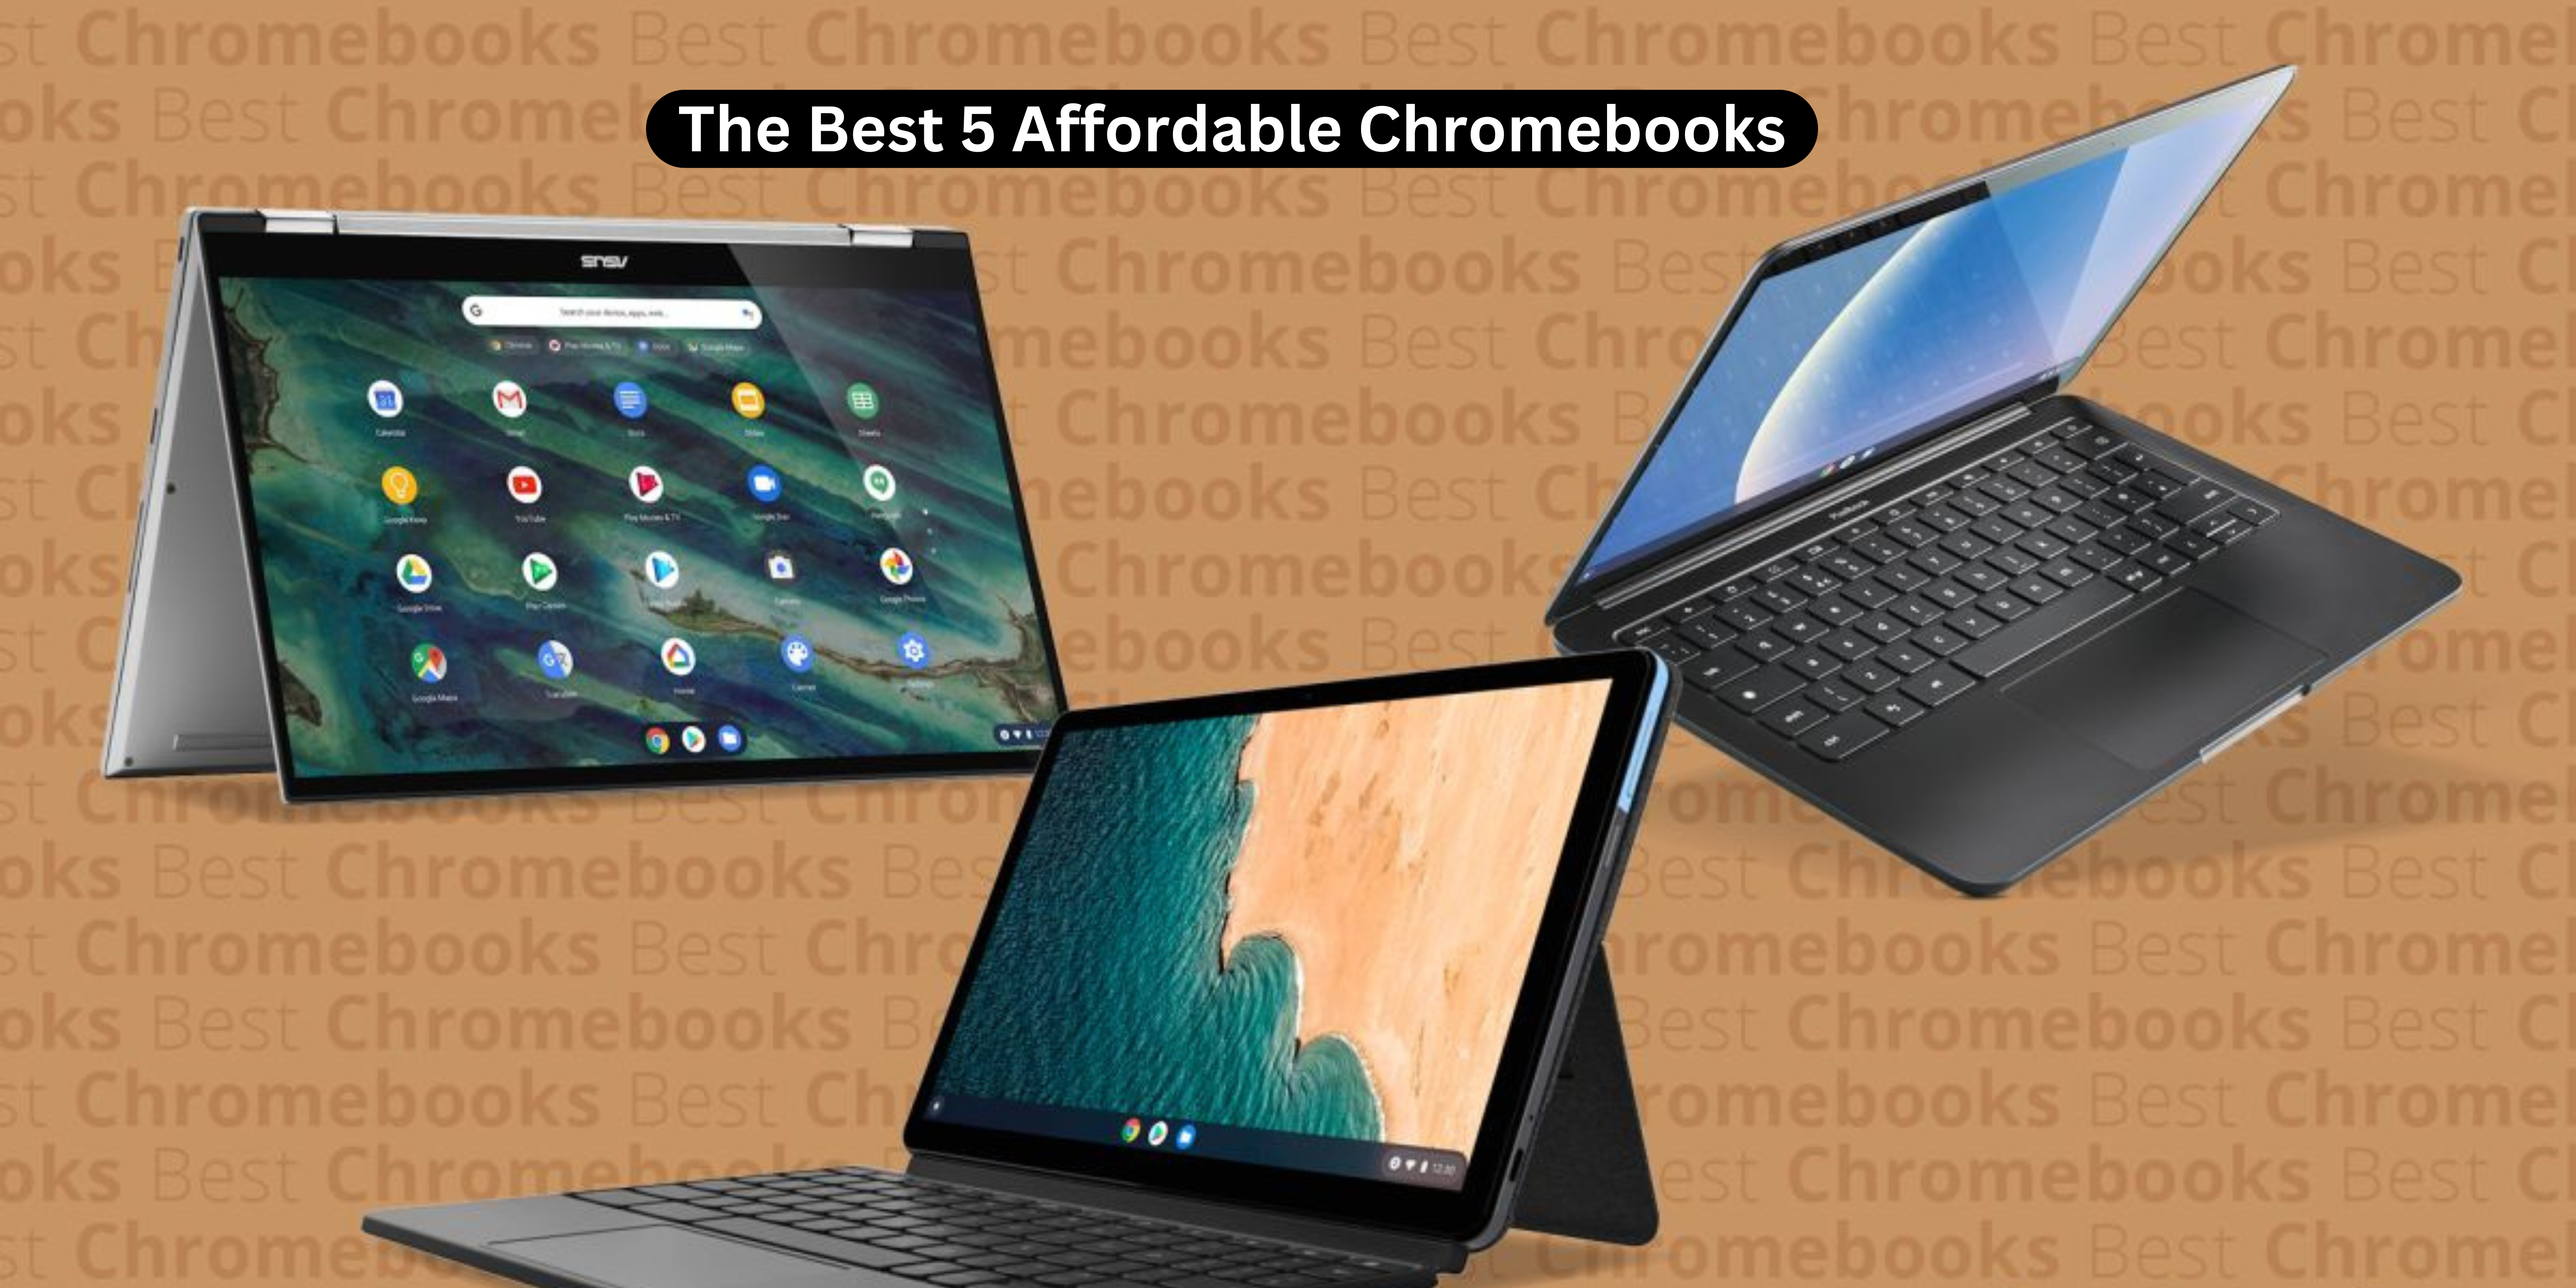 the best 5 affordable chromebooks for back-to-school or distance learning